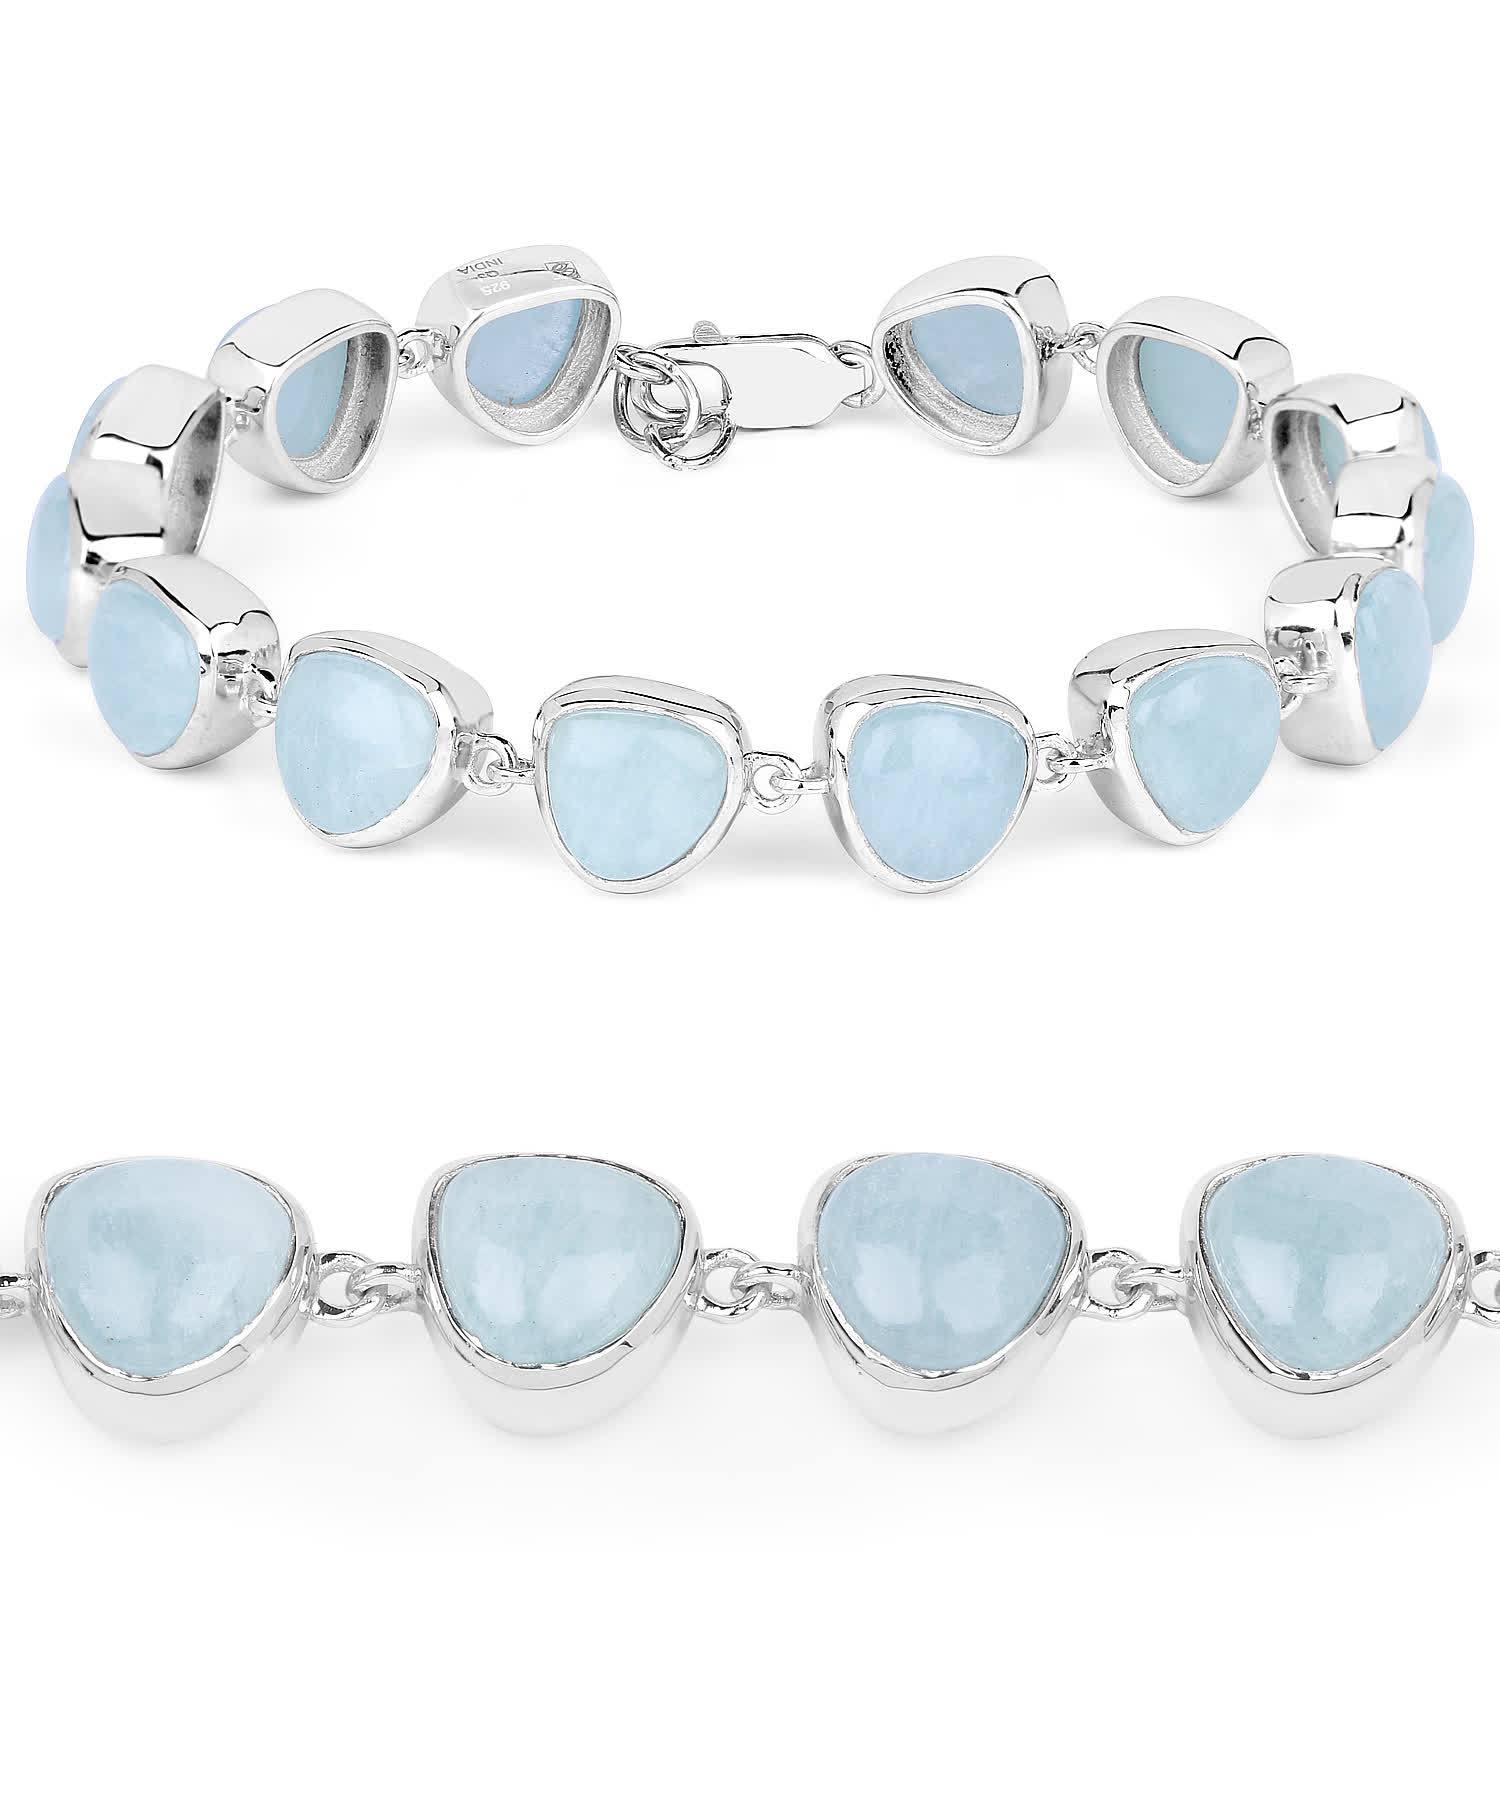 25.90ctw Natural Icy Sky Blue Aquamarine Rhodium Plated 925 Sterling Silver Link Bracelet View 2